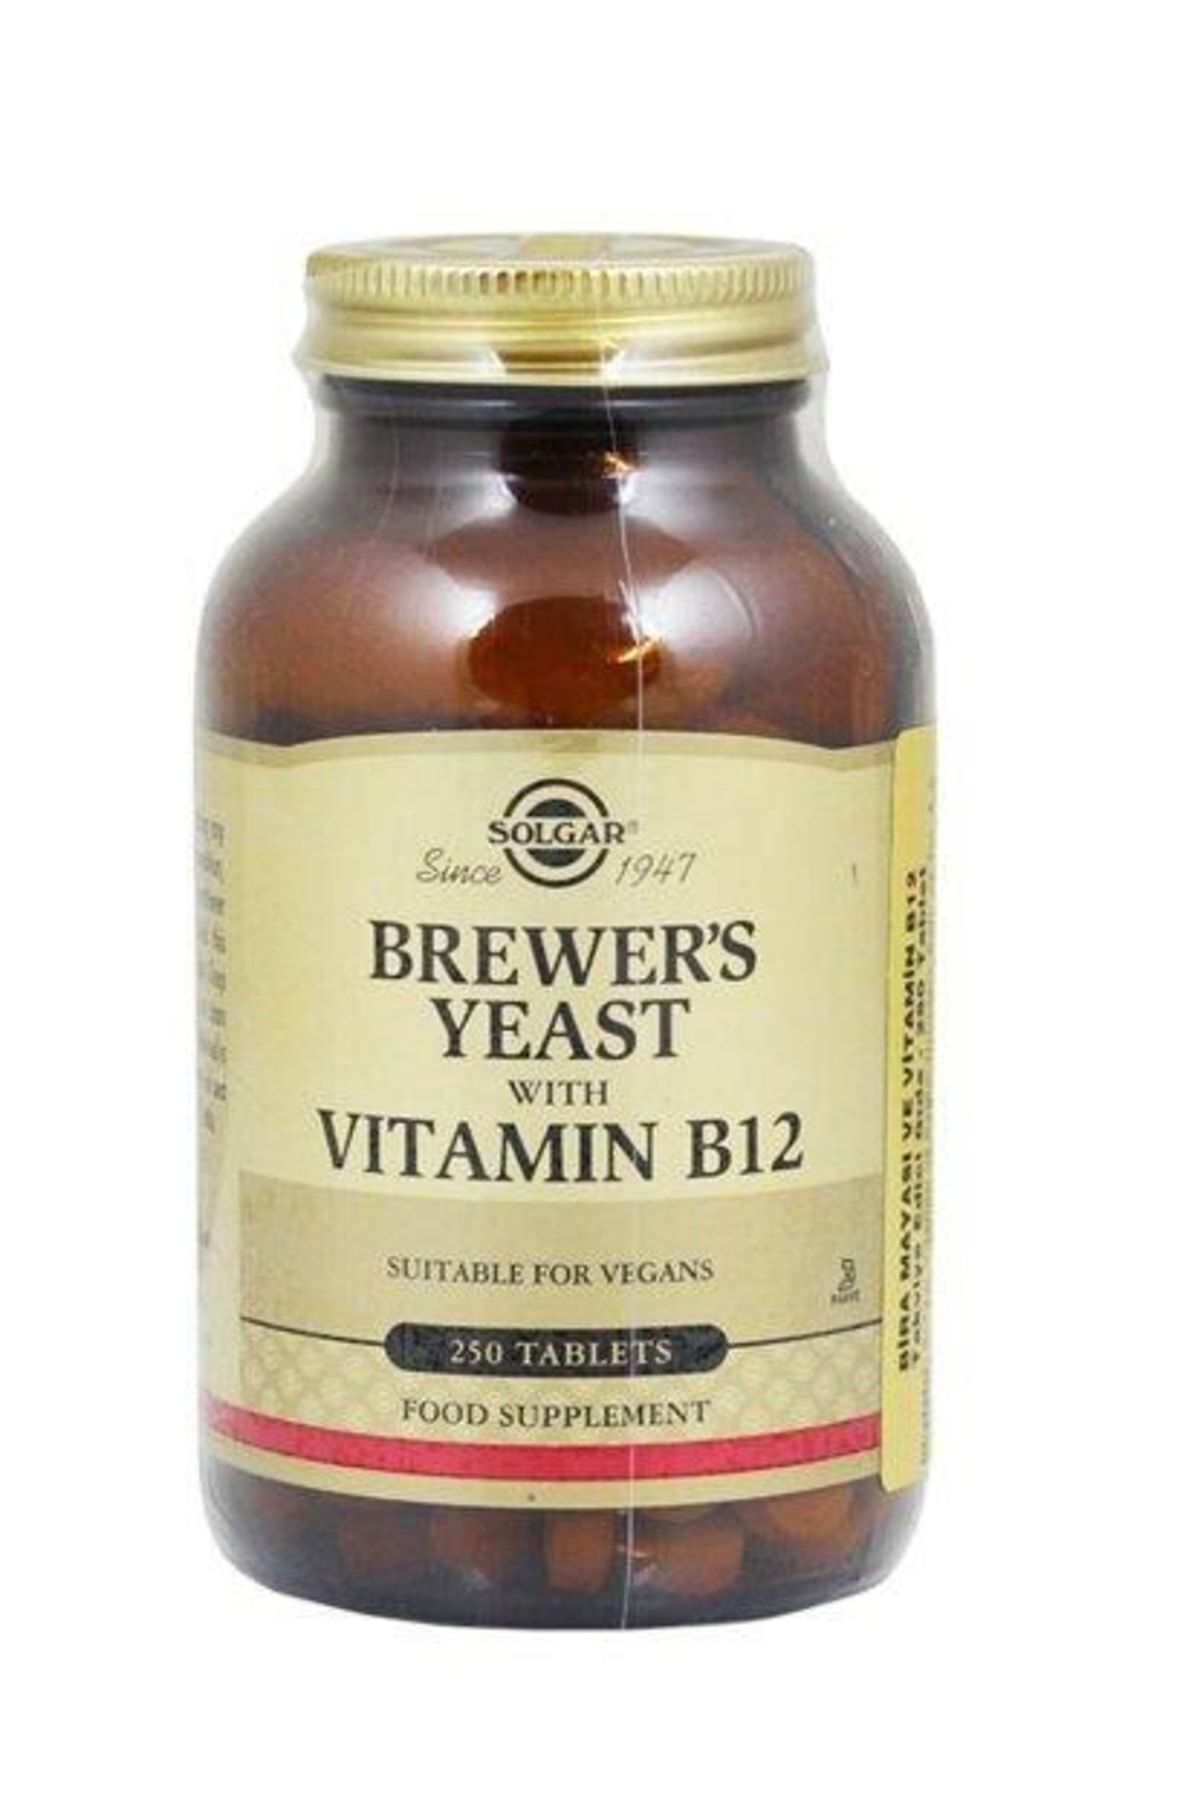 Solgar Brewer’s Yeast With Vitamin B12 250 Tablet